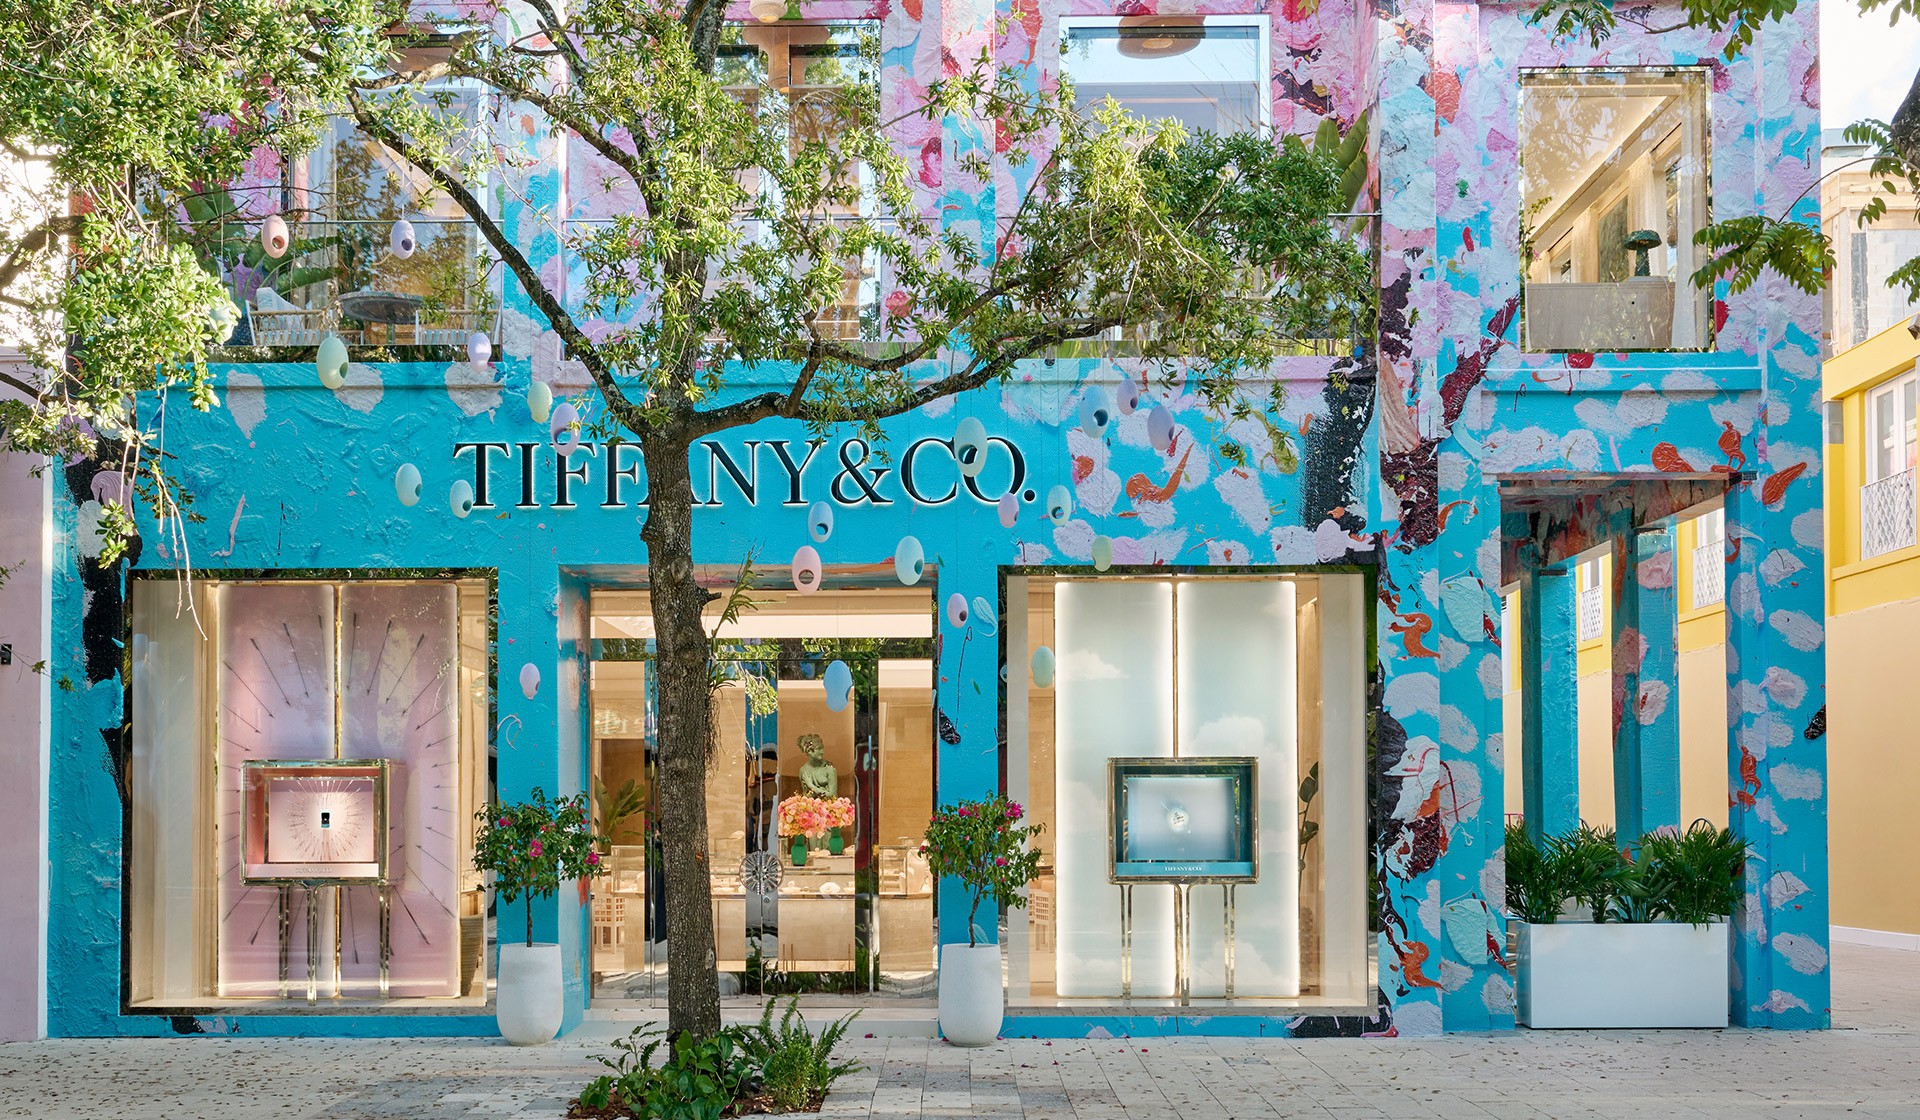 Tiffany & Co. Reopens Miami Design District Store with a Bevy of Art, Design, and Diamonds